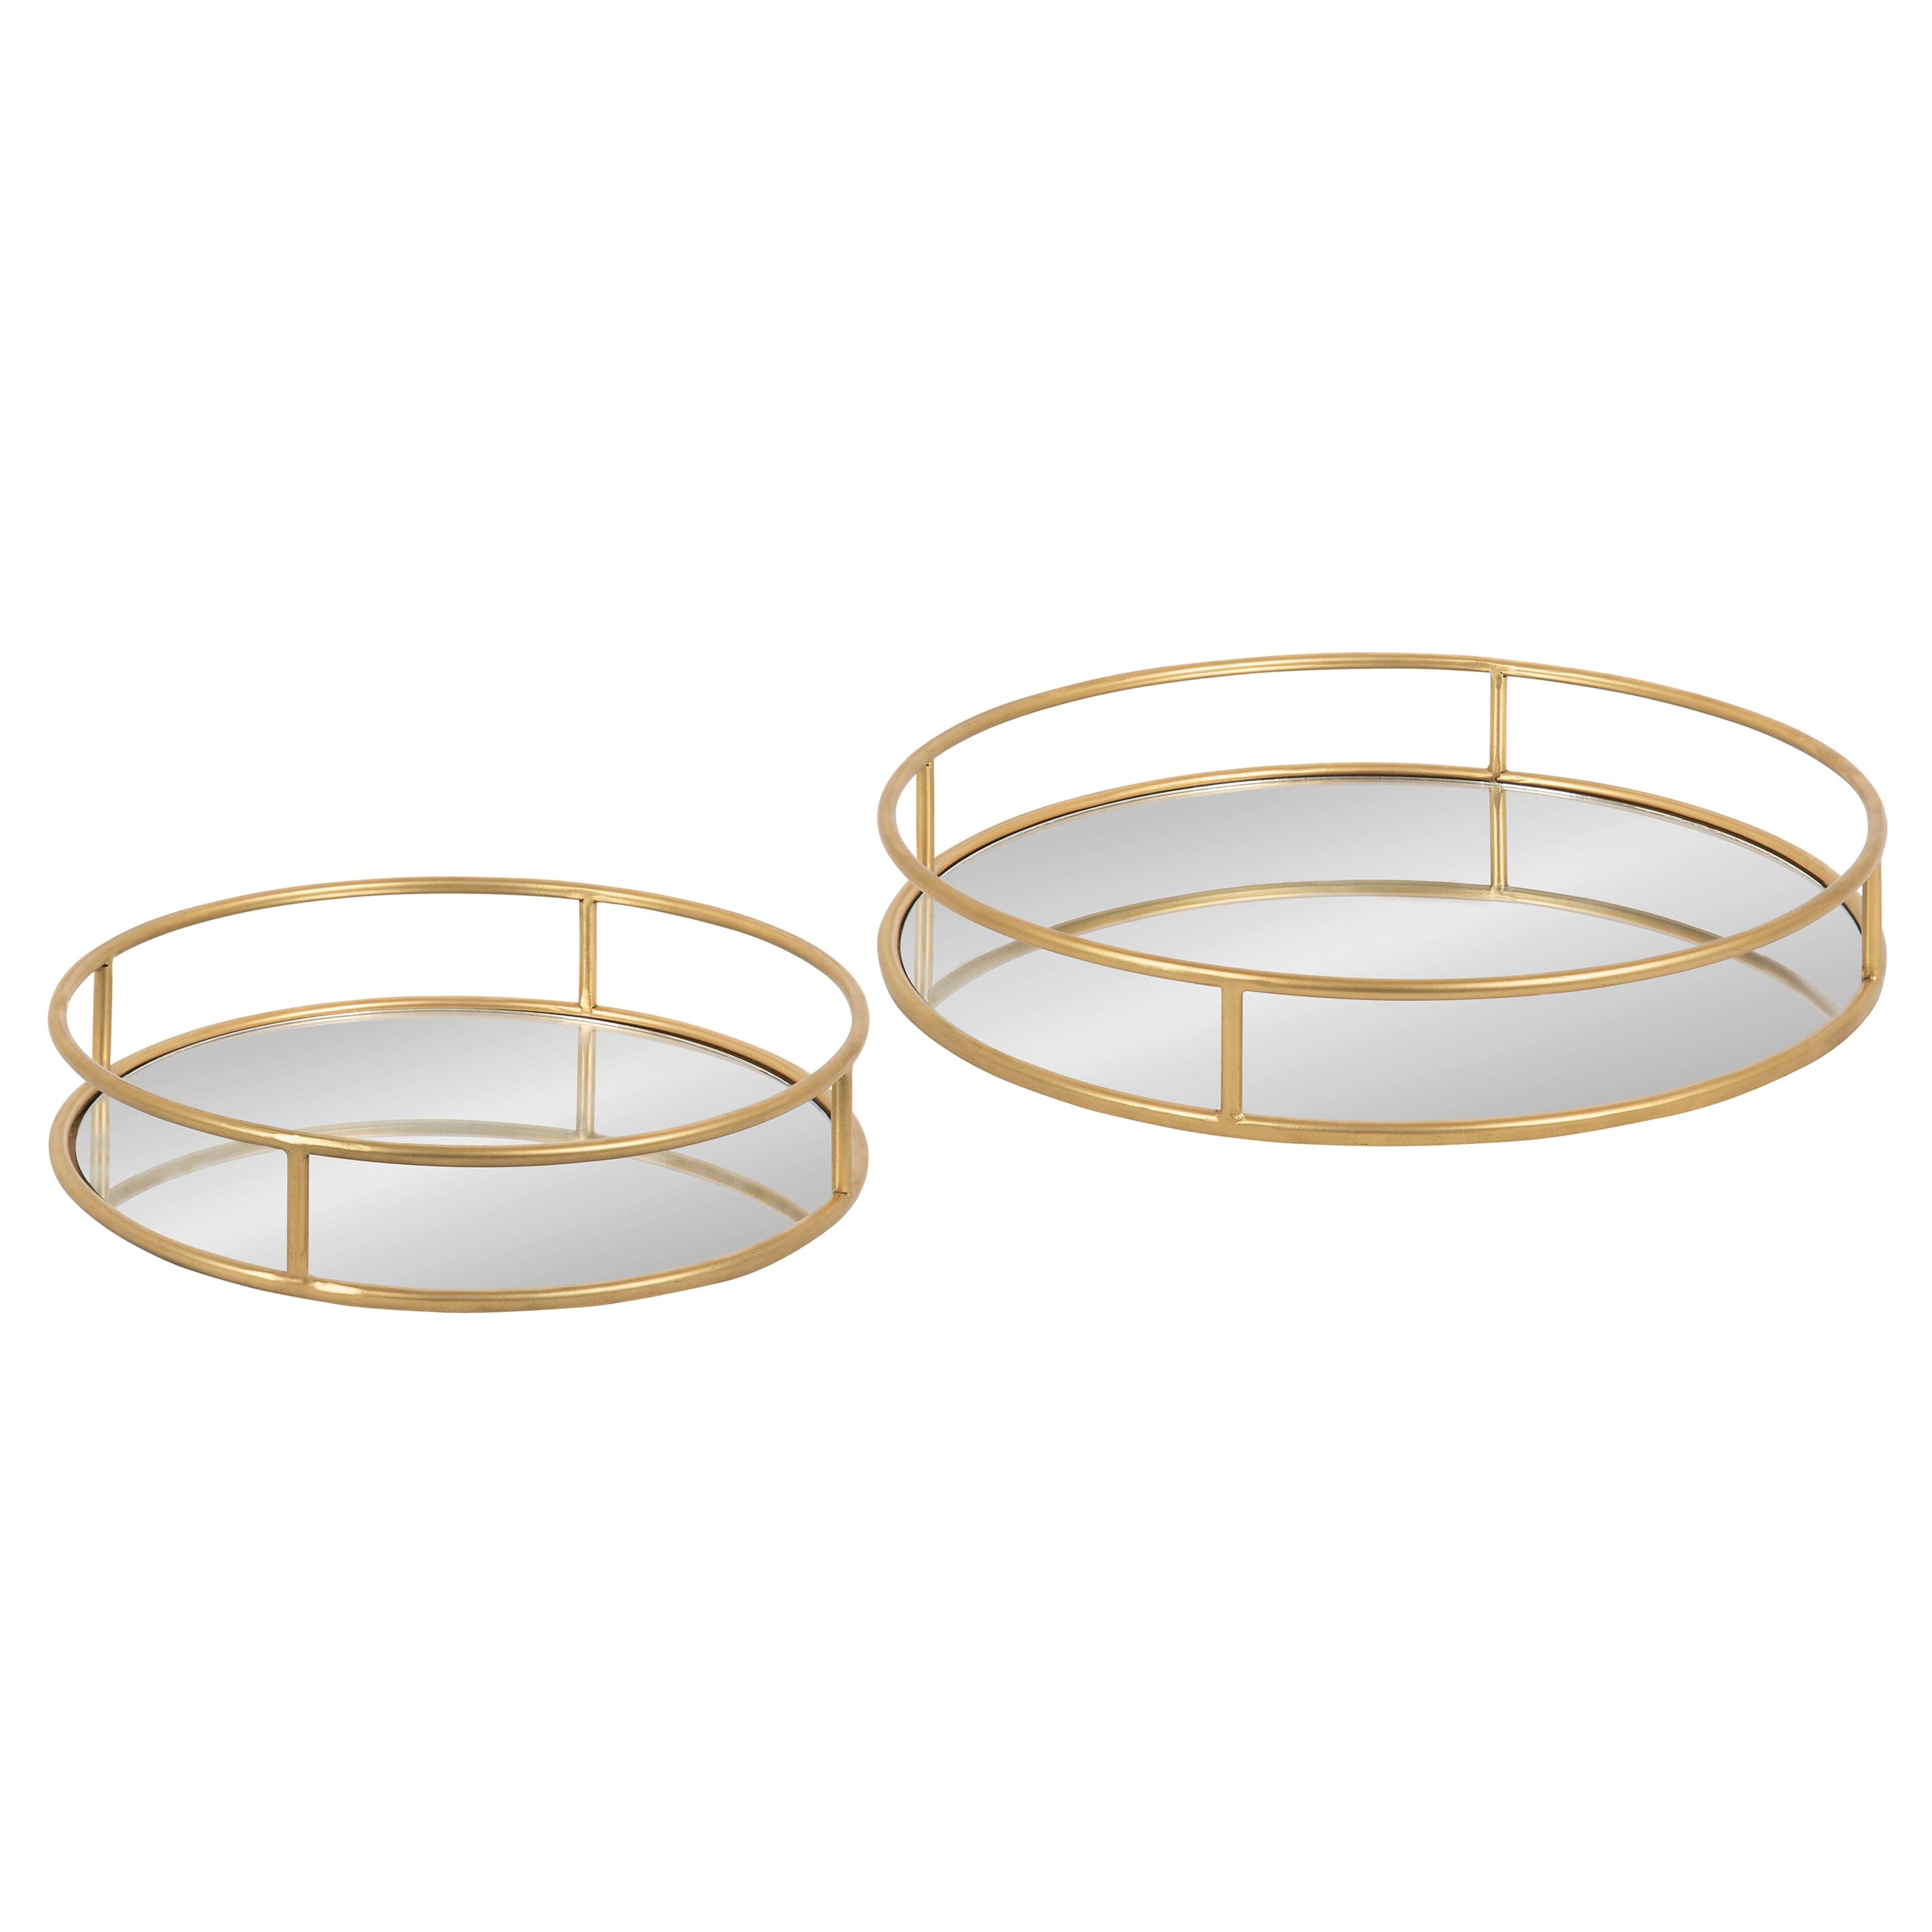 Felicia Glamorous Gold Round Metal Nesting Trays with Mirror Surface, Set of 2